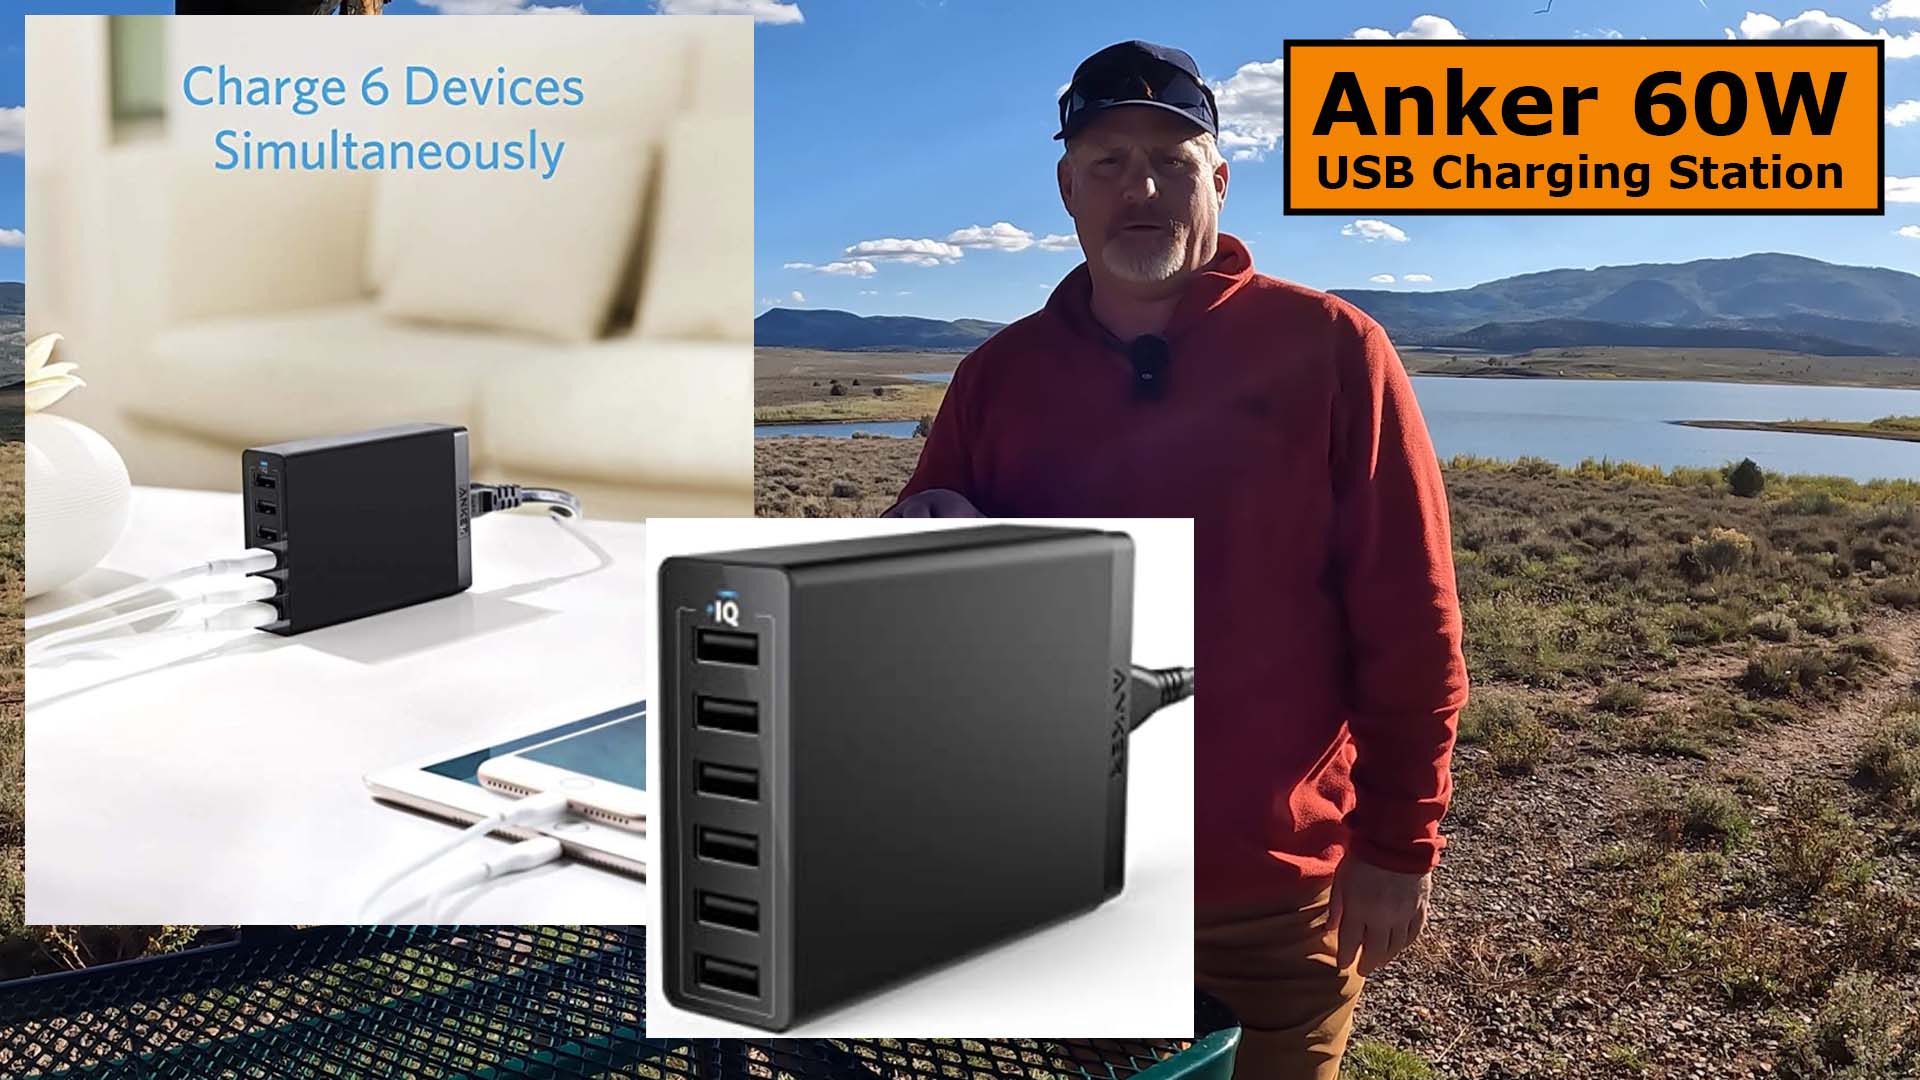 Anker USB Charging Station Review